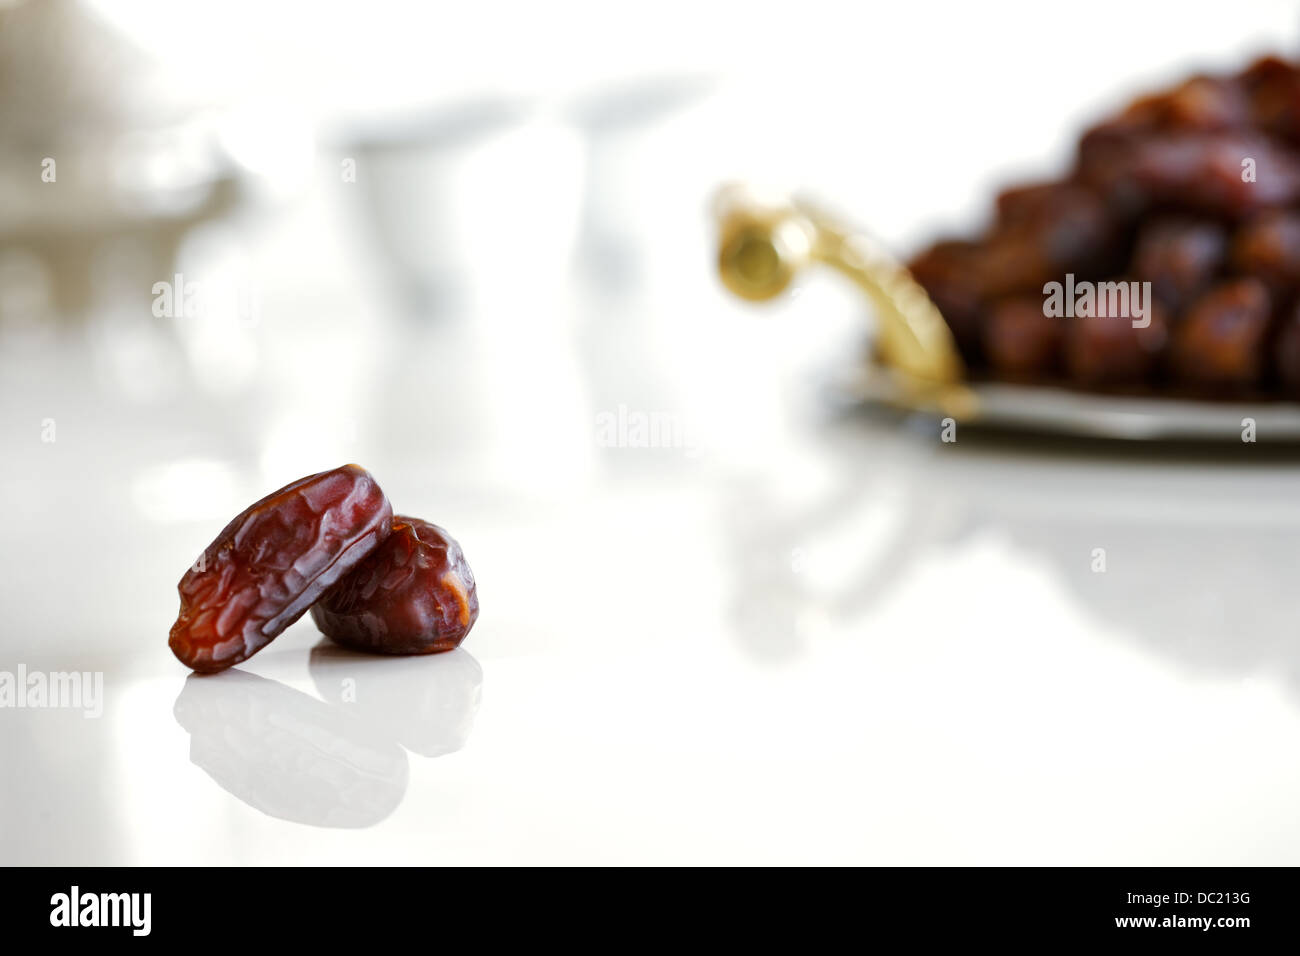 Dried Arabic dates presented on an ornate tray and shot against a white background Stock Photo